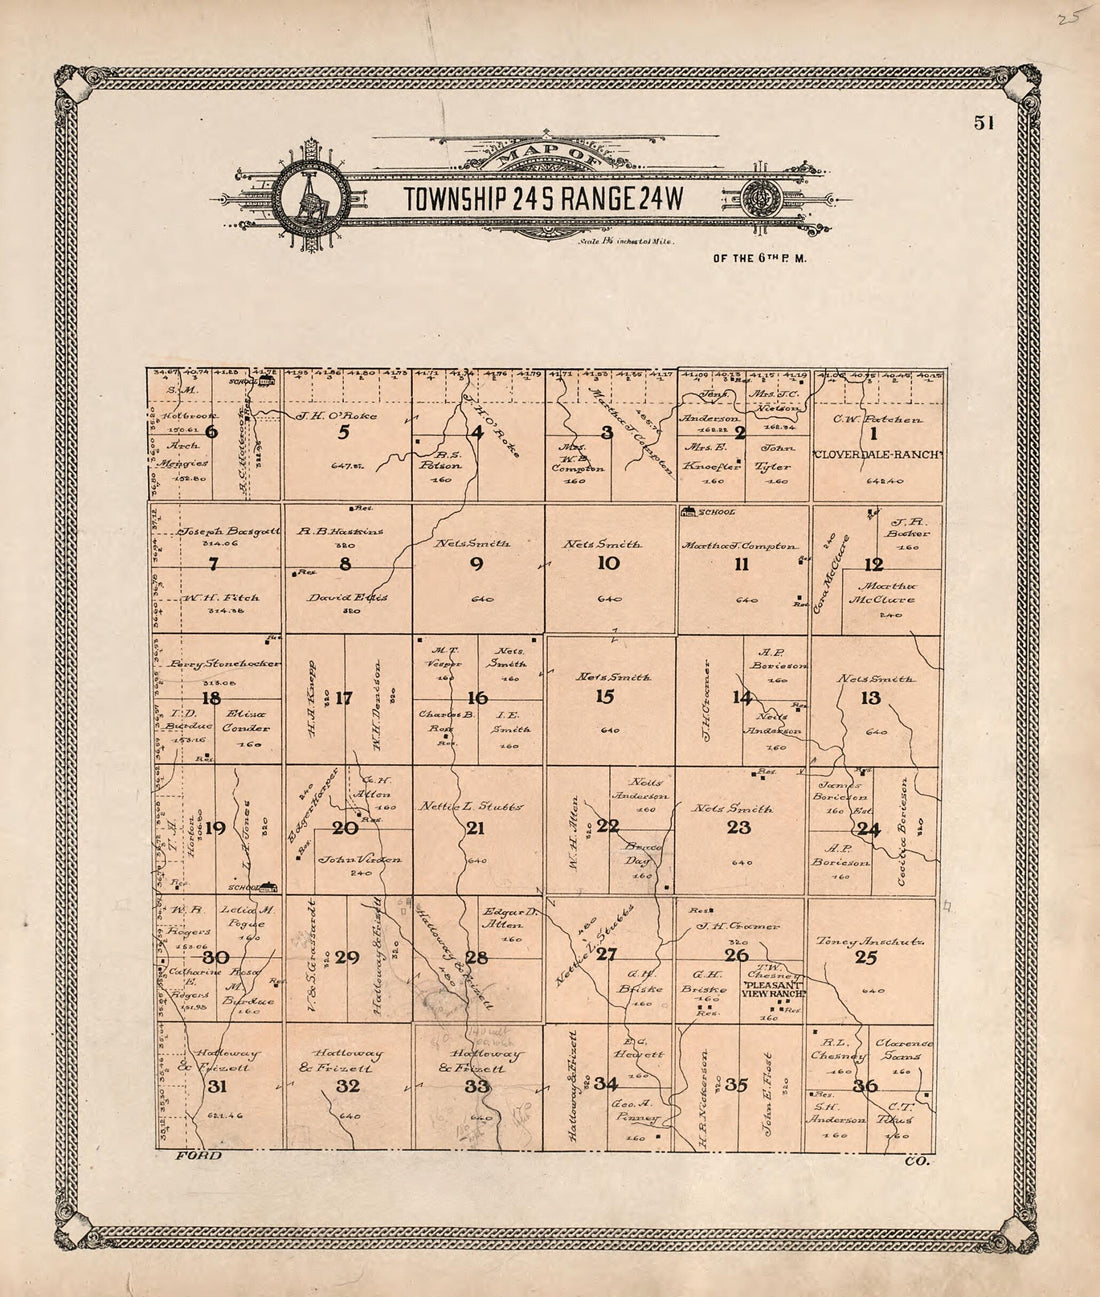 This old map of Map of Township 24 S Range 24 W from Standard Atlas of Hodgeman County, Kansas from 1907 was created by  Geo. A. Ogle &amp; Co in 1907